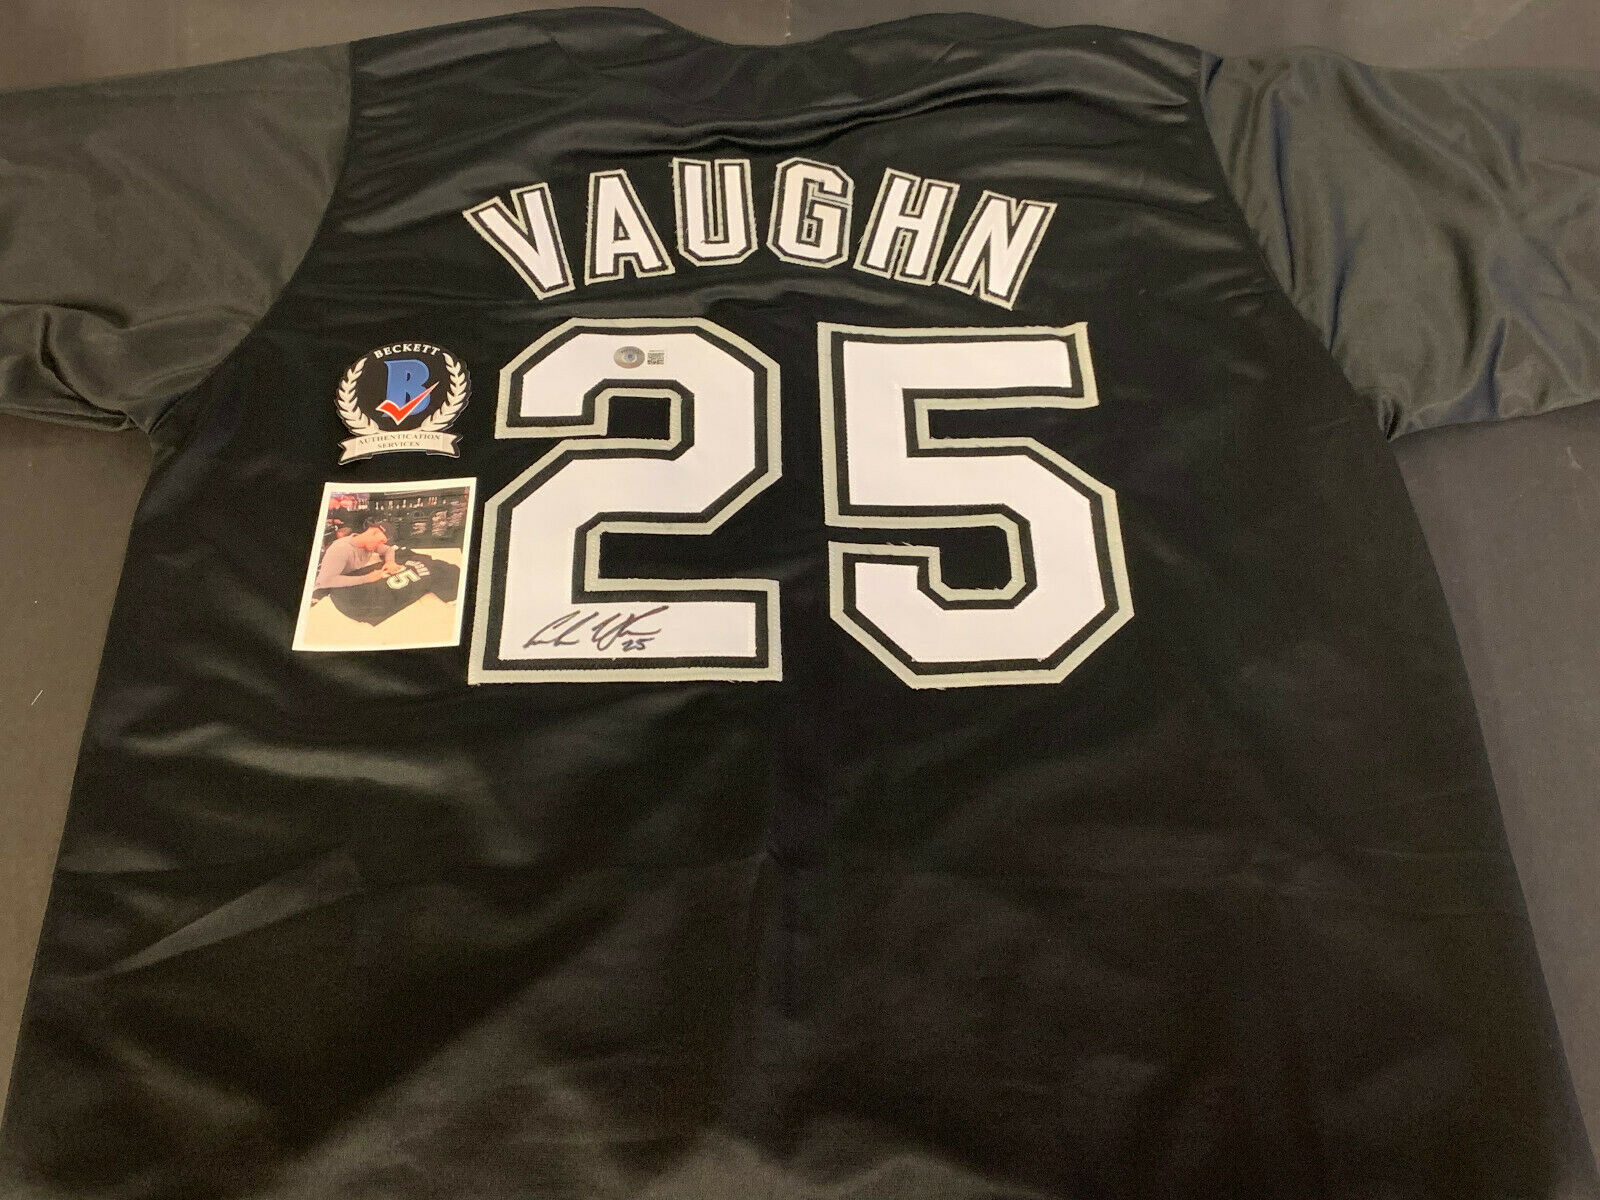 andrew vaughn white sox jersey